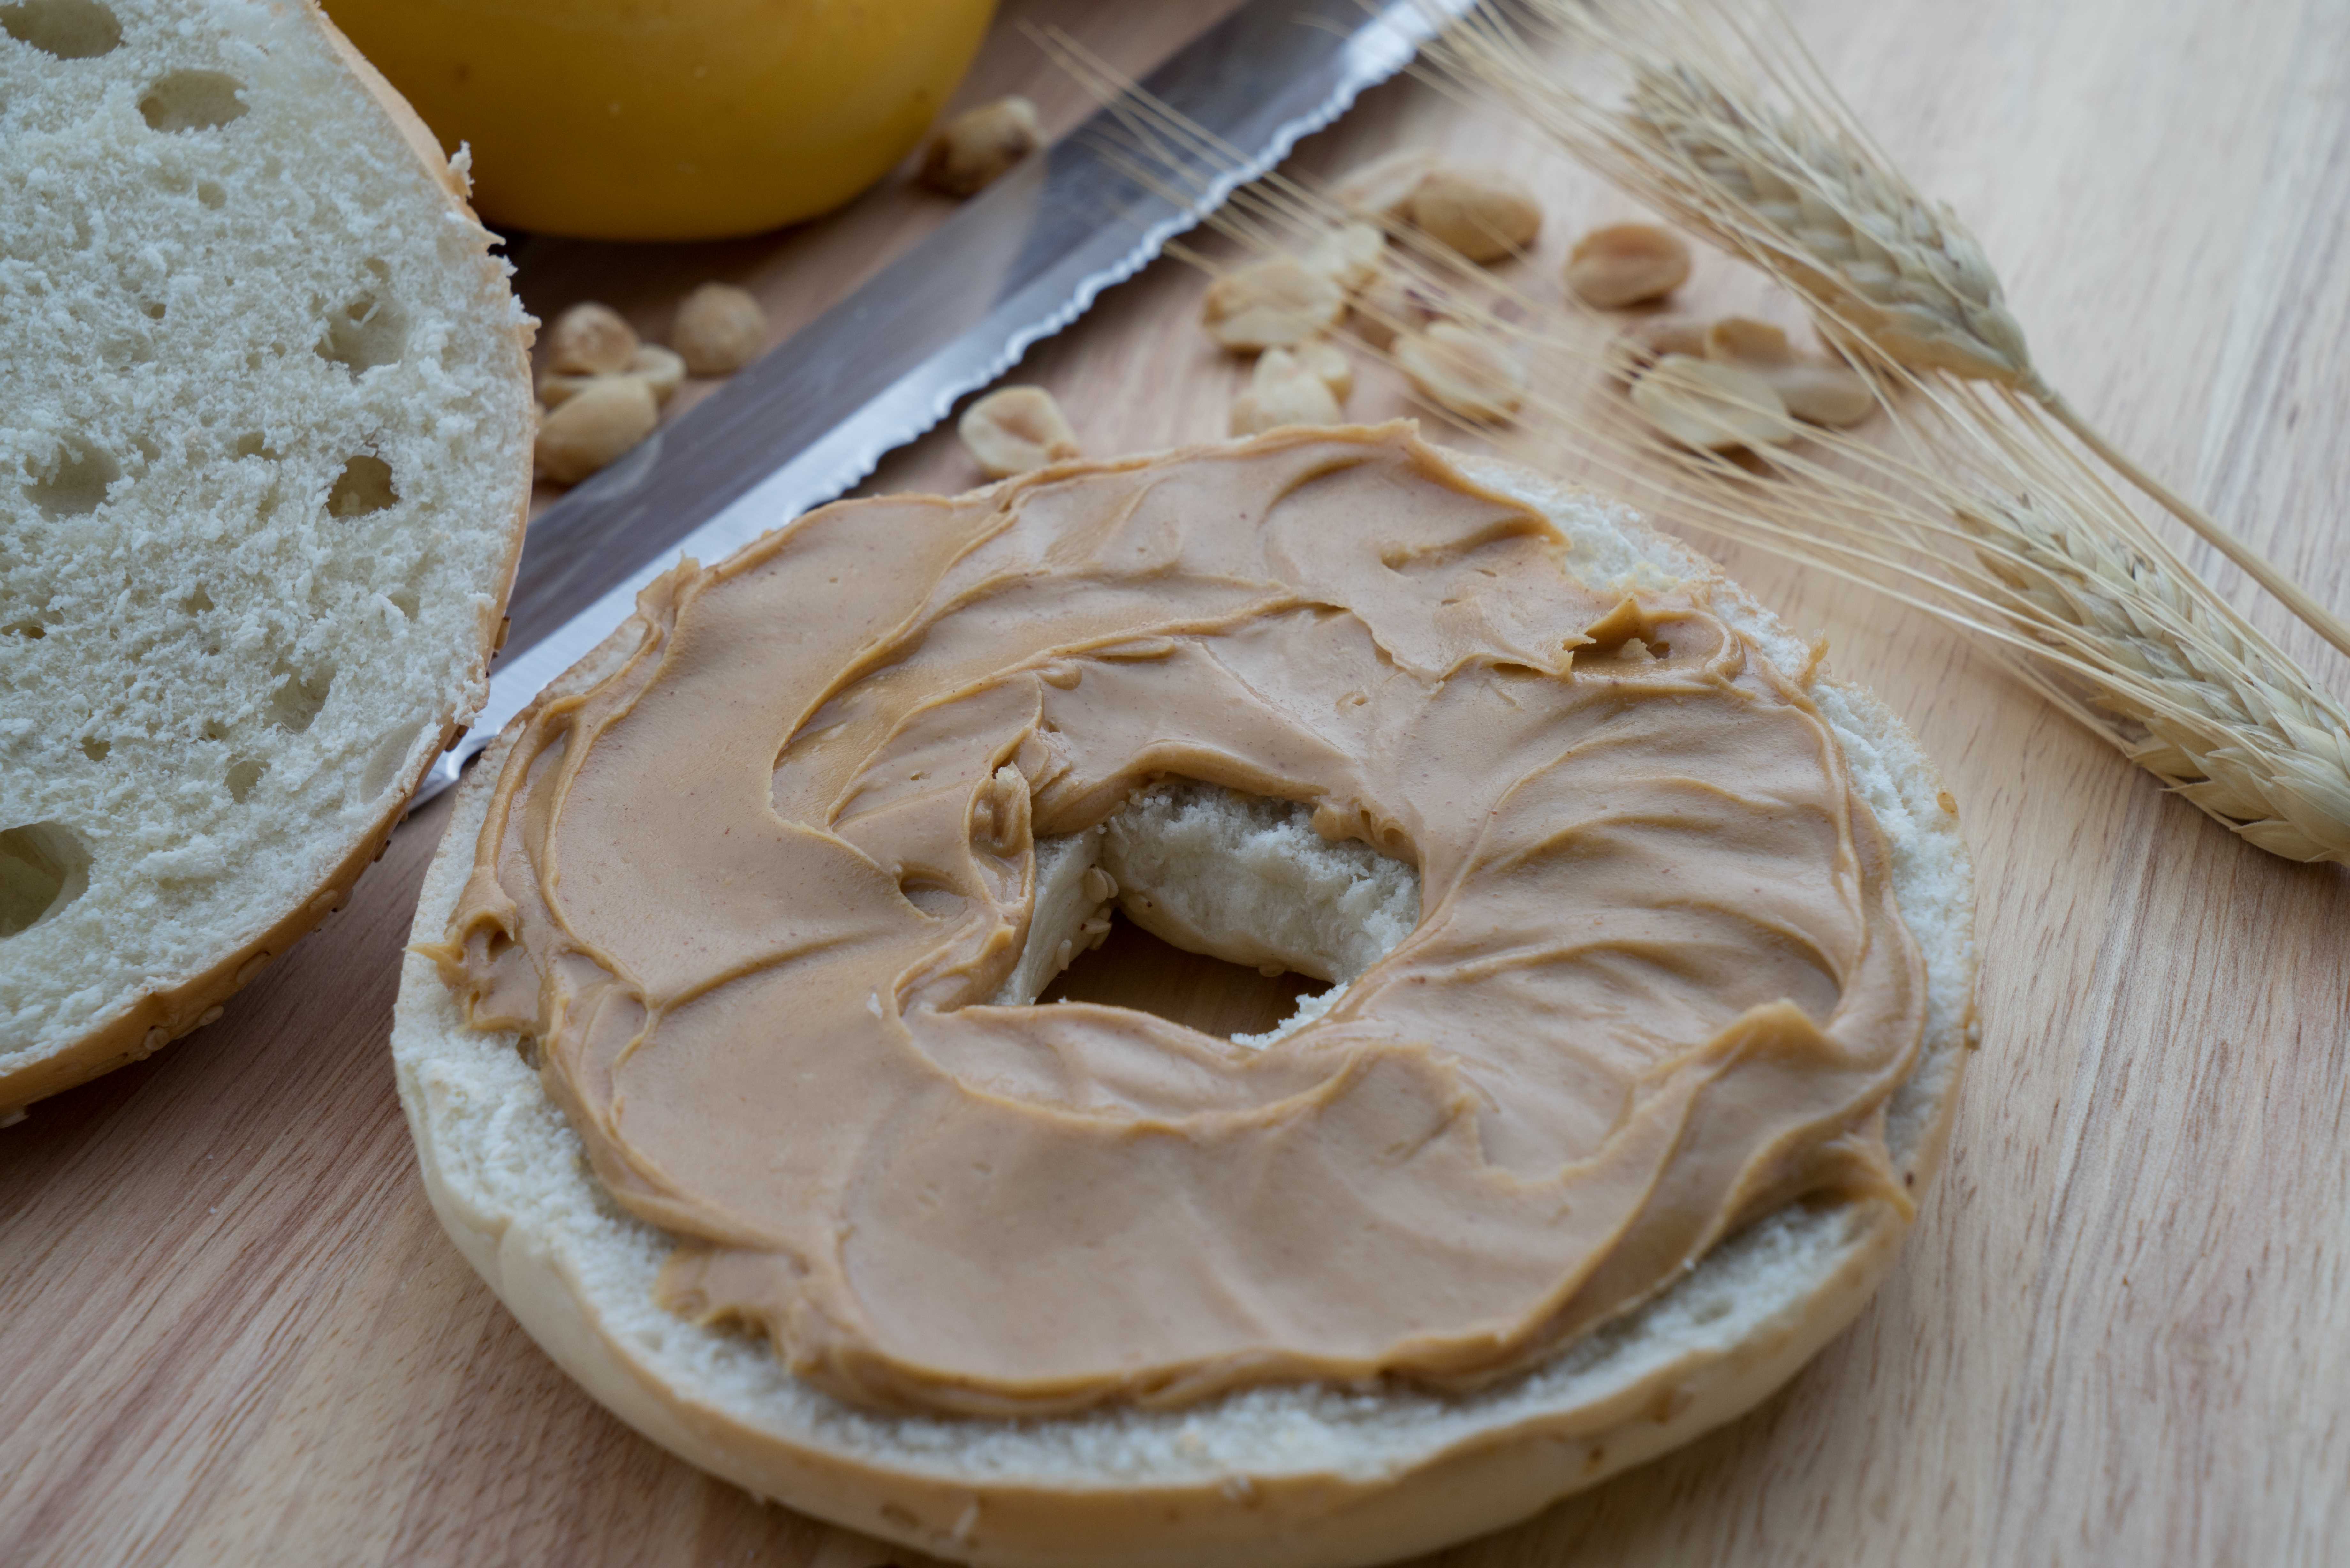 A healthy breakfast includes protein and carbs, like this whole wheat bagel and peanut butter.